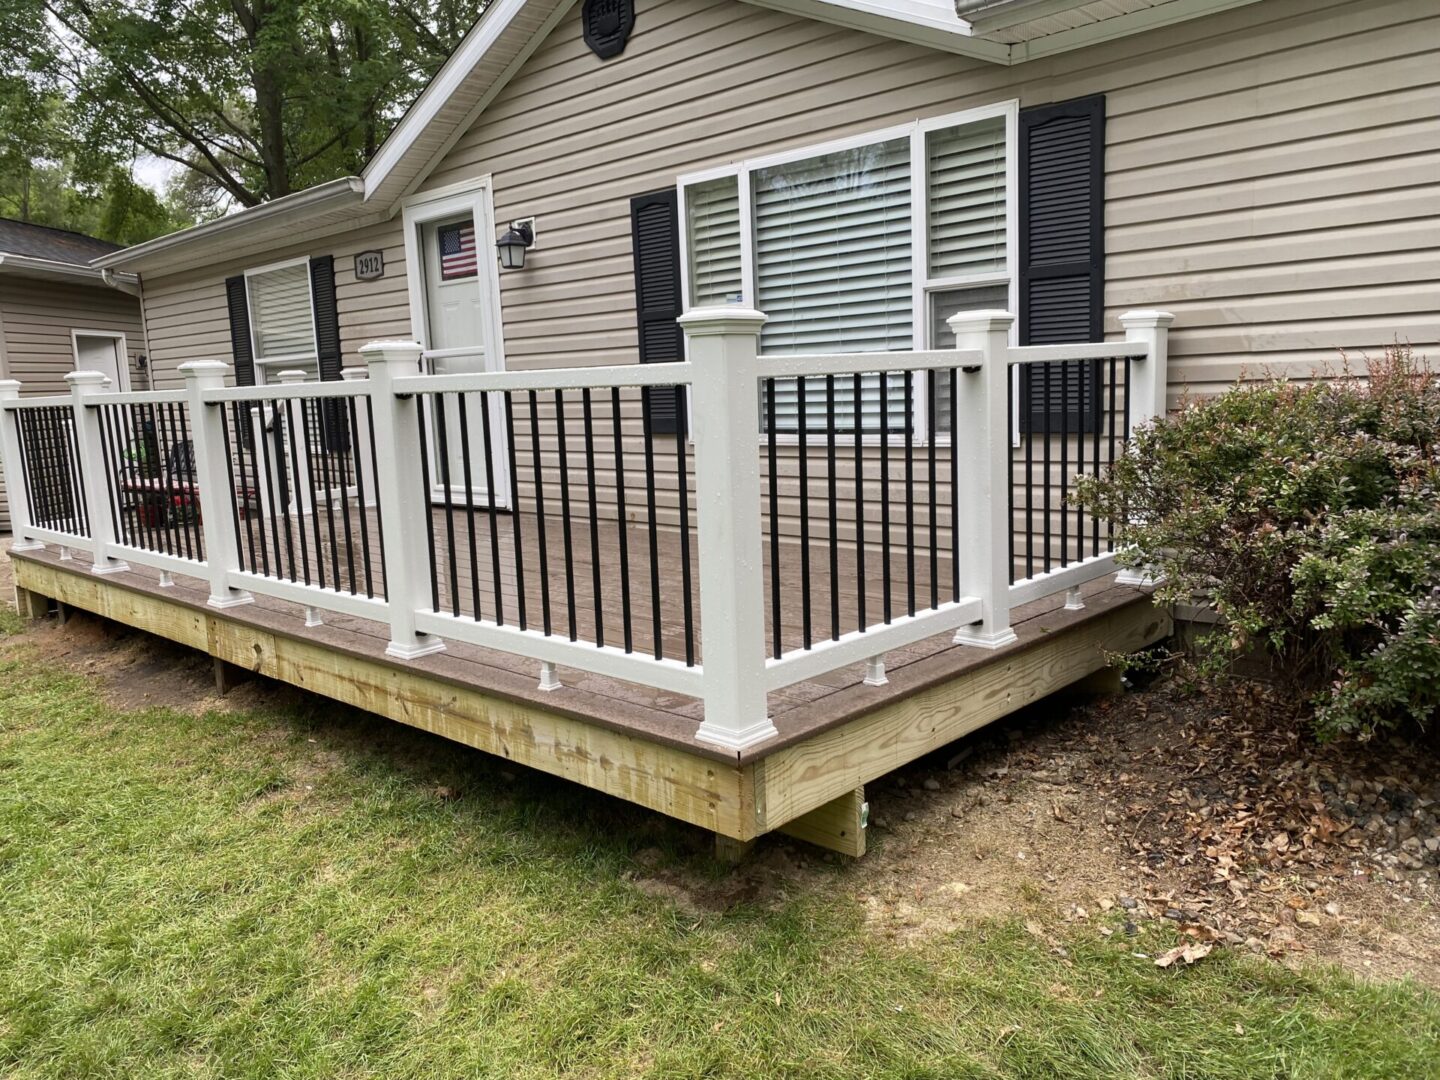 A house with a deck and railing in it